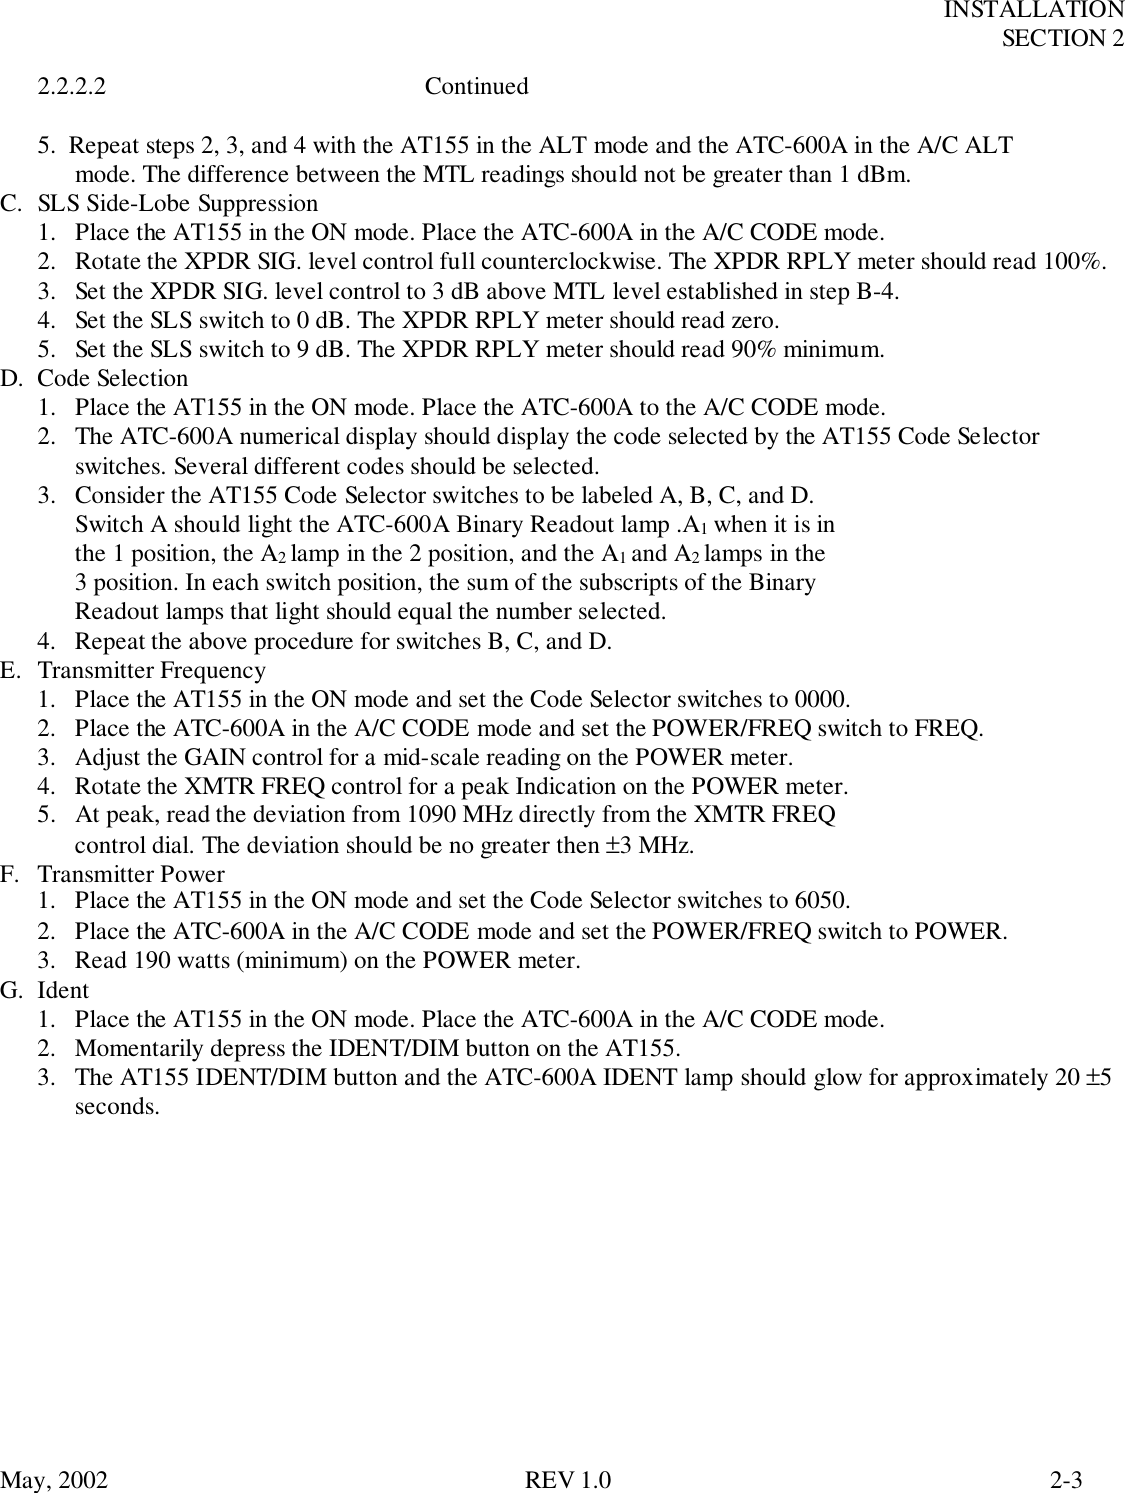 INSTALLATIONSECTION 2May, 2002 REV 1.0 2-32.2.2.2 Continued5.  Repeat steps 2, 3, and 4 with the AT155 in the ALT mode and the ATC-600A in the A/C ALTmode. The difference between the MTL readings should not be greater than 1 dBm.C. SLS Side-Lobe Suppression1. Place the AT155 in the ON mode. Place the ATC-600A in the A/C CODE mode.2. Rotate the XPDR SIG. level control full counterclockwise. The XPDR RPLY meter should read 100%.3. Set the XPDR SIG. level control to 3 dB above MTL level established in step B-4.4. Set the SLS switch to 0 dB. The XPDR RPLY meter should read zero.5. Set the SLS switch to 9 dB. The XPDR RPLY meter should read 90% minimum.D. Code Selection1. Place the AT155 in the ON mode. Place the ATC-600A to the A/C CODE mode.2. The ATC-600A numerical display should display the code selected by the AT155 Code Selectorswitches. Several different codes should be selected.3. Consider the AT155 Code Selector switches to be labeled A, B, C, and D.Switch A should light the ATC-600A Binary Readout lamp .A1 when it is inthe 1 position, the A2 lamp in the 2 position, and the A1 and A2 lamps in the3 position. In each switch position, the sum of the subscripts of the BinaryReadout lamps that light should equal the number selected.4. Repeat the above procedure for switches B, C, and D.E. Transmitter Frequency1. Place the AT155 in the ON mode and set the Code Selector switches to 0000.2. Place the ATC-600A in the A/C CODE mode and set the POWER/FREQ switch to FREQ.3. Adjust the GAIN control for a mid-scale reading on the POWER meter.4. Rotate the XMTR FREQ control for a peak Indication on the POWER meter.5.  At peak, read the deviation from 1090 MHz directly from the XMTR FREQcontrol dial. The deviation should be no greater then ±3 MHz.F. Transmitter Power1. Place the AT155 in the ON mode and set the Code Selector switches to 6050.2. Place the ATC-600A in the A/C CODE mode and set the POWER/FREQ switch to POWER.3. Read 190 watts (minimum) on the POWER meter.G. Ident1. Place the AT155 in the ON mode. Place the ATC-600A in the A/C CODE mode.2. Momentarily depress the IDENT/DIM button on the AT155.3. The AT155 IDENT/DIM button and the ATC-600A IDENT lamp should glow for approximately 20 ±5seconds.